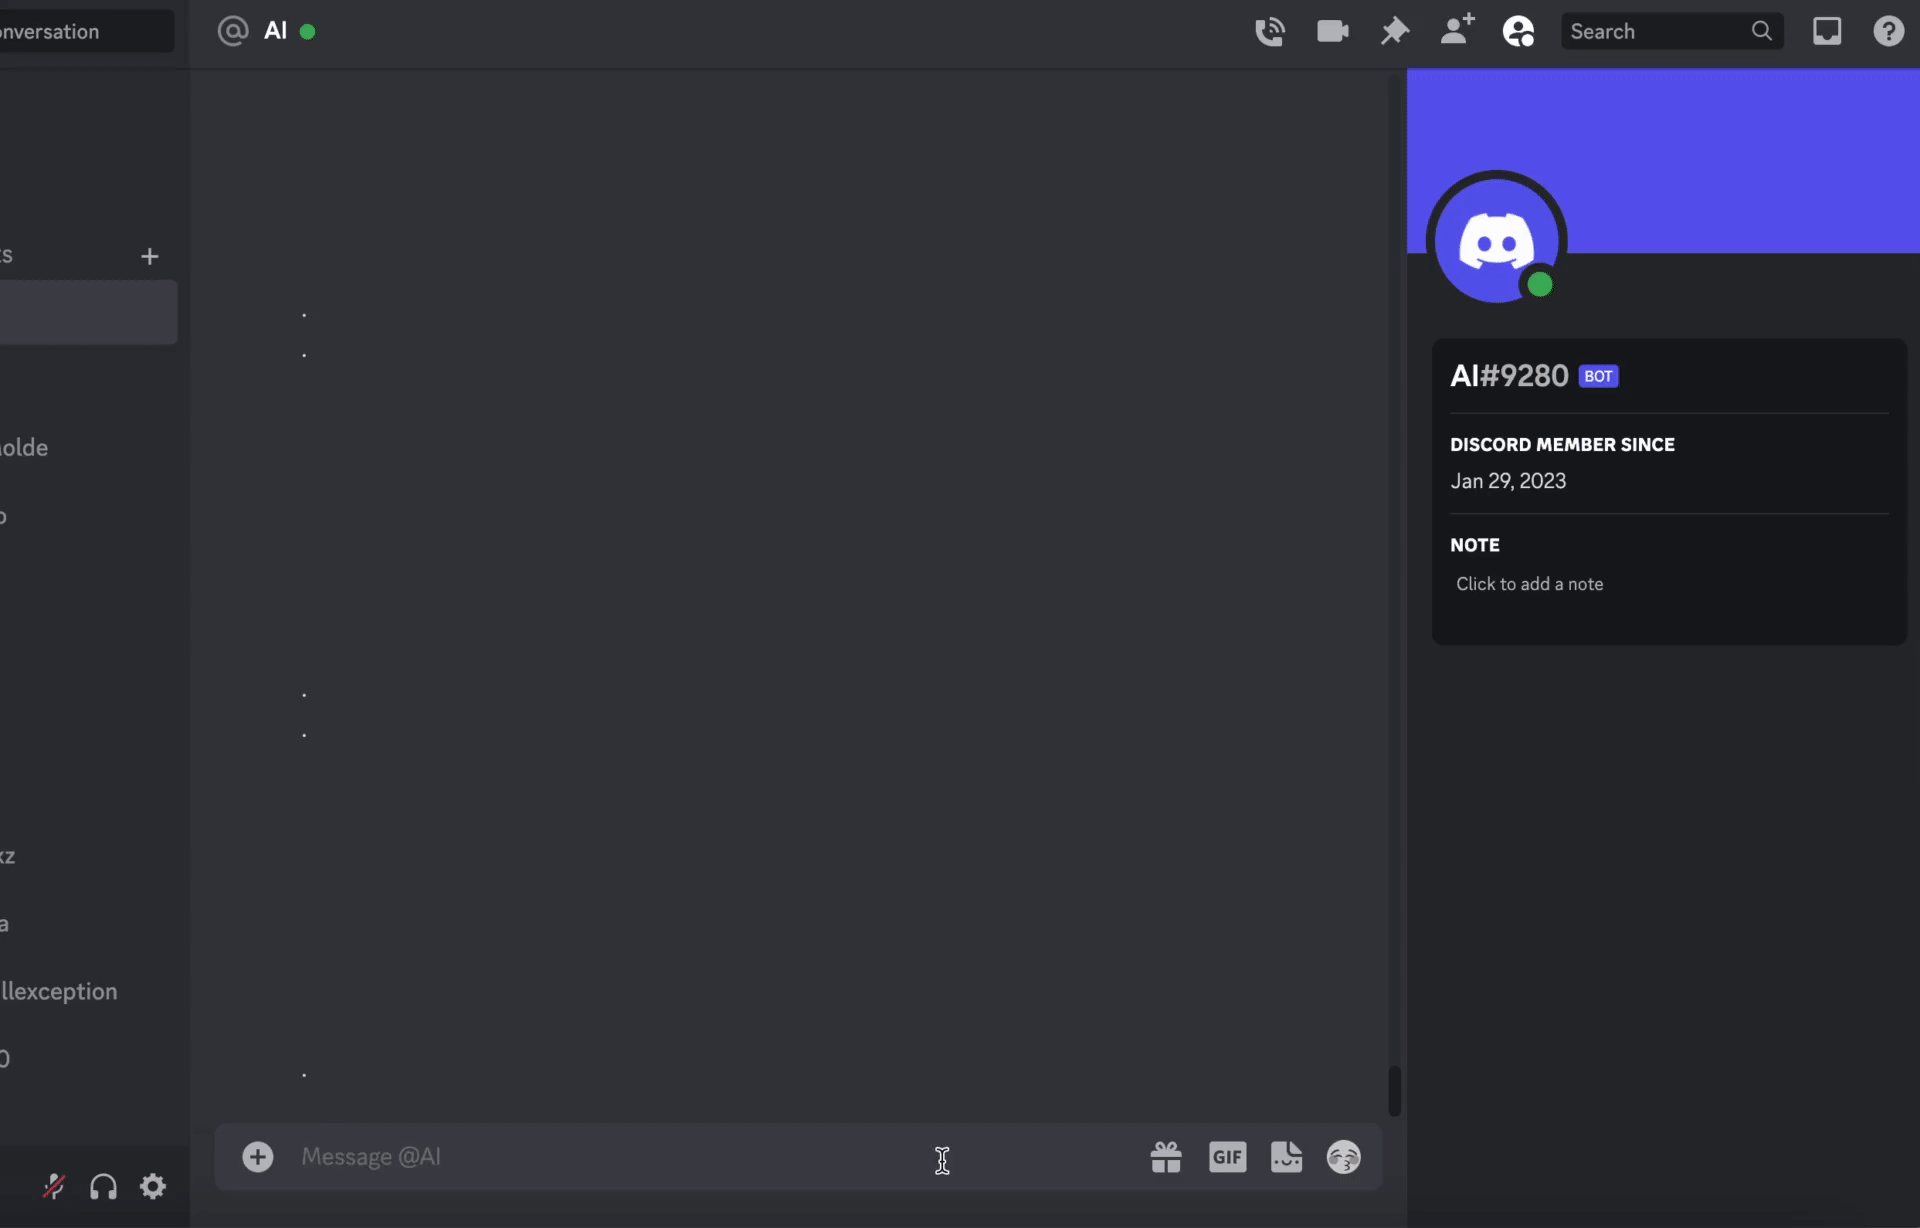 Build a serverless Discord bot with OpenFaaS and Golang